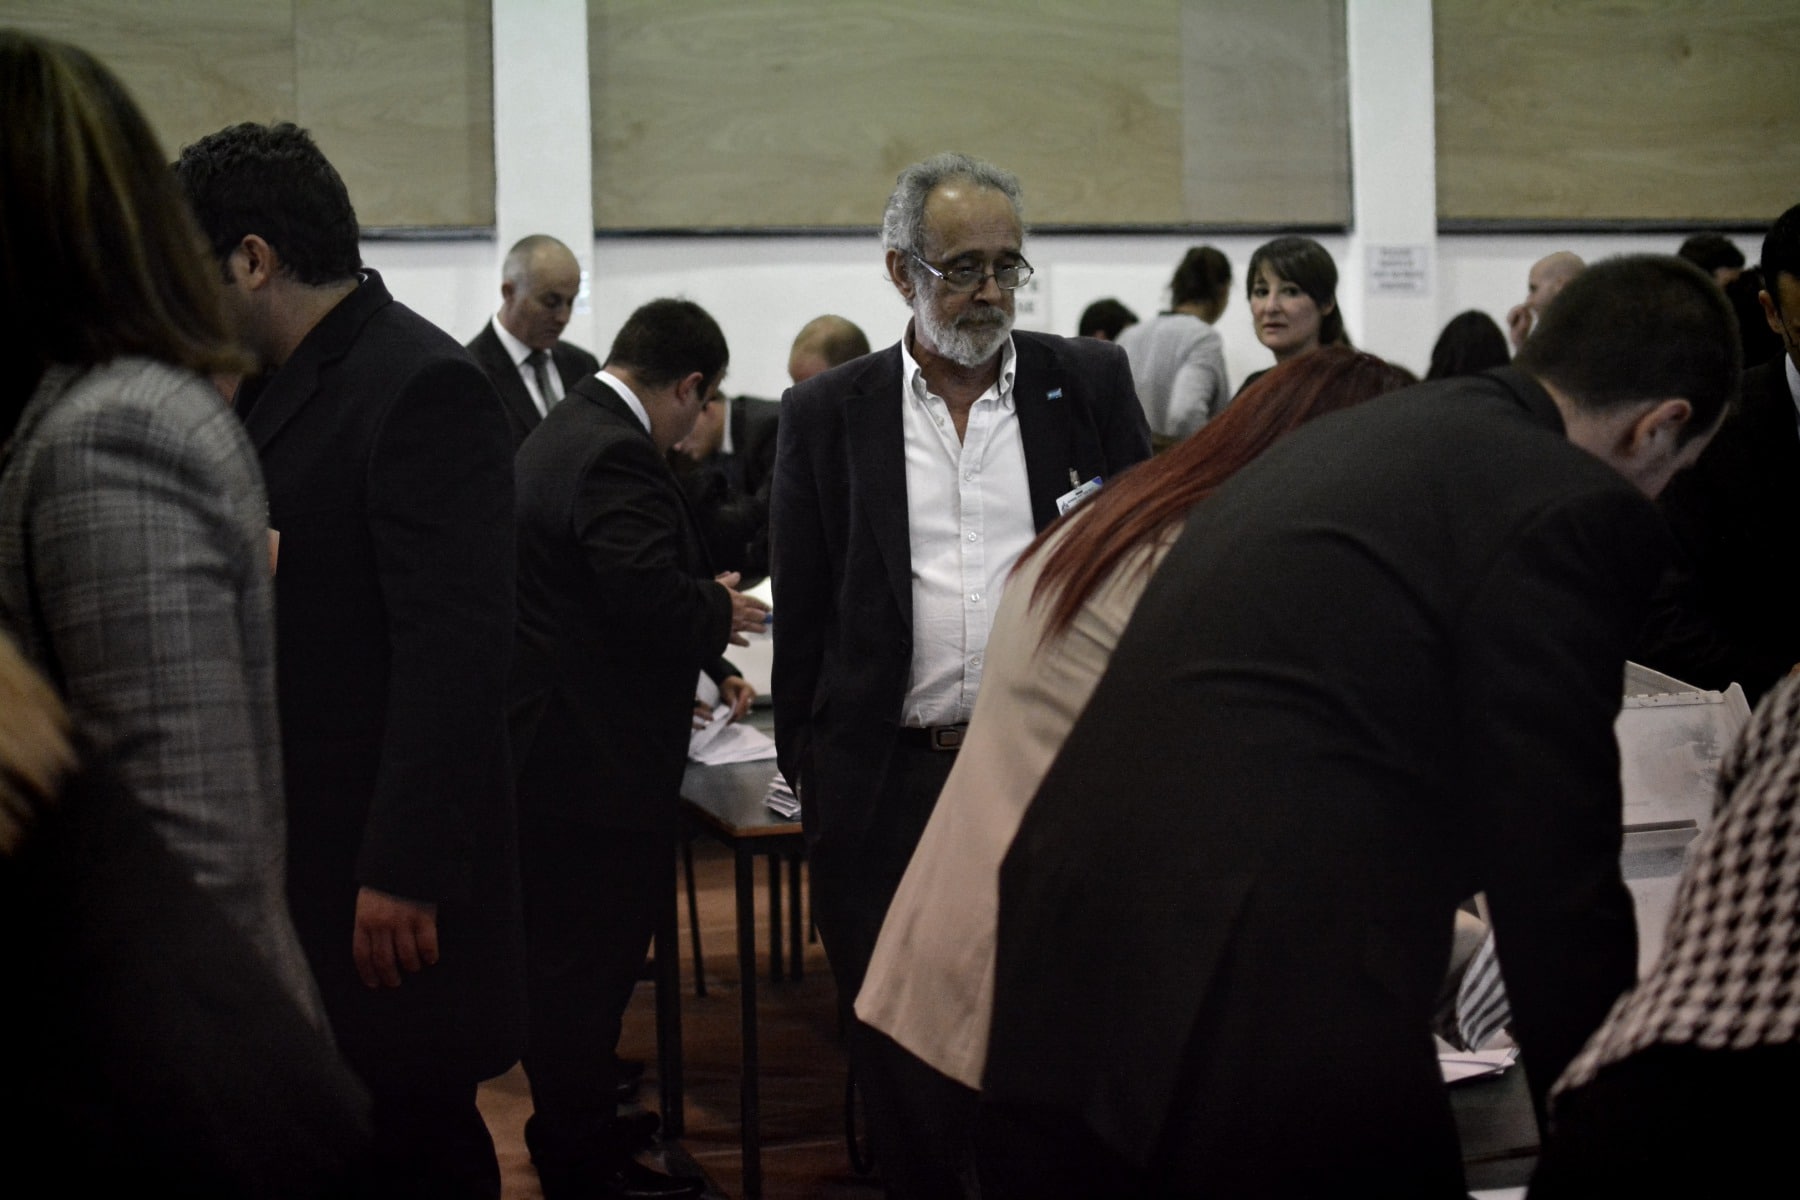 Gibraltar - 27th November 2015 - With security around John Macintosh Hall tightened, the first ballot box surprised everyone arriving dead on 10pm, the time polling stations were supposed to close their doors. A stream of ballot boxes then arrived as GBC announced the results of their exit poll putting the GSLP/Liberal Alliance ahead with 72%. As counting started by midnight candidates started to arrive at John Macintosh Hall where the count is taking place.One of the first candidates to arrive was John Cortes, followed by Edwin Reyes. Moments later Joseph Garcia, Gilbert Licudi, Albert Isola and Steven Linares arrived to a somewhat quite JHM as counting started.The verification count was overseen by agents of both parties, with the Governor Alison Macmilan also visiting JMH to oversee the protocols being followed, as is traditional during general elections in Gibraltar.John Macintosh Hall also saw tonight armed patrols present around the area, in keeping with the high security alert status presently experienced in Gibraltar. The security detail deployed included the presence of an inspector within the armed response detail, this being one of the few occassions in which a high ranking officer has been seen present as part of the unit when in public.